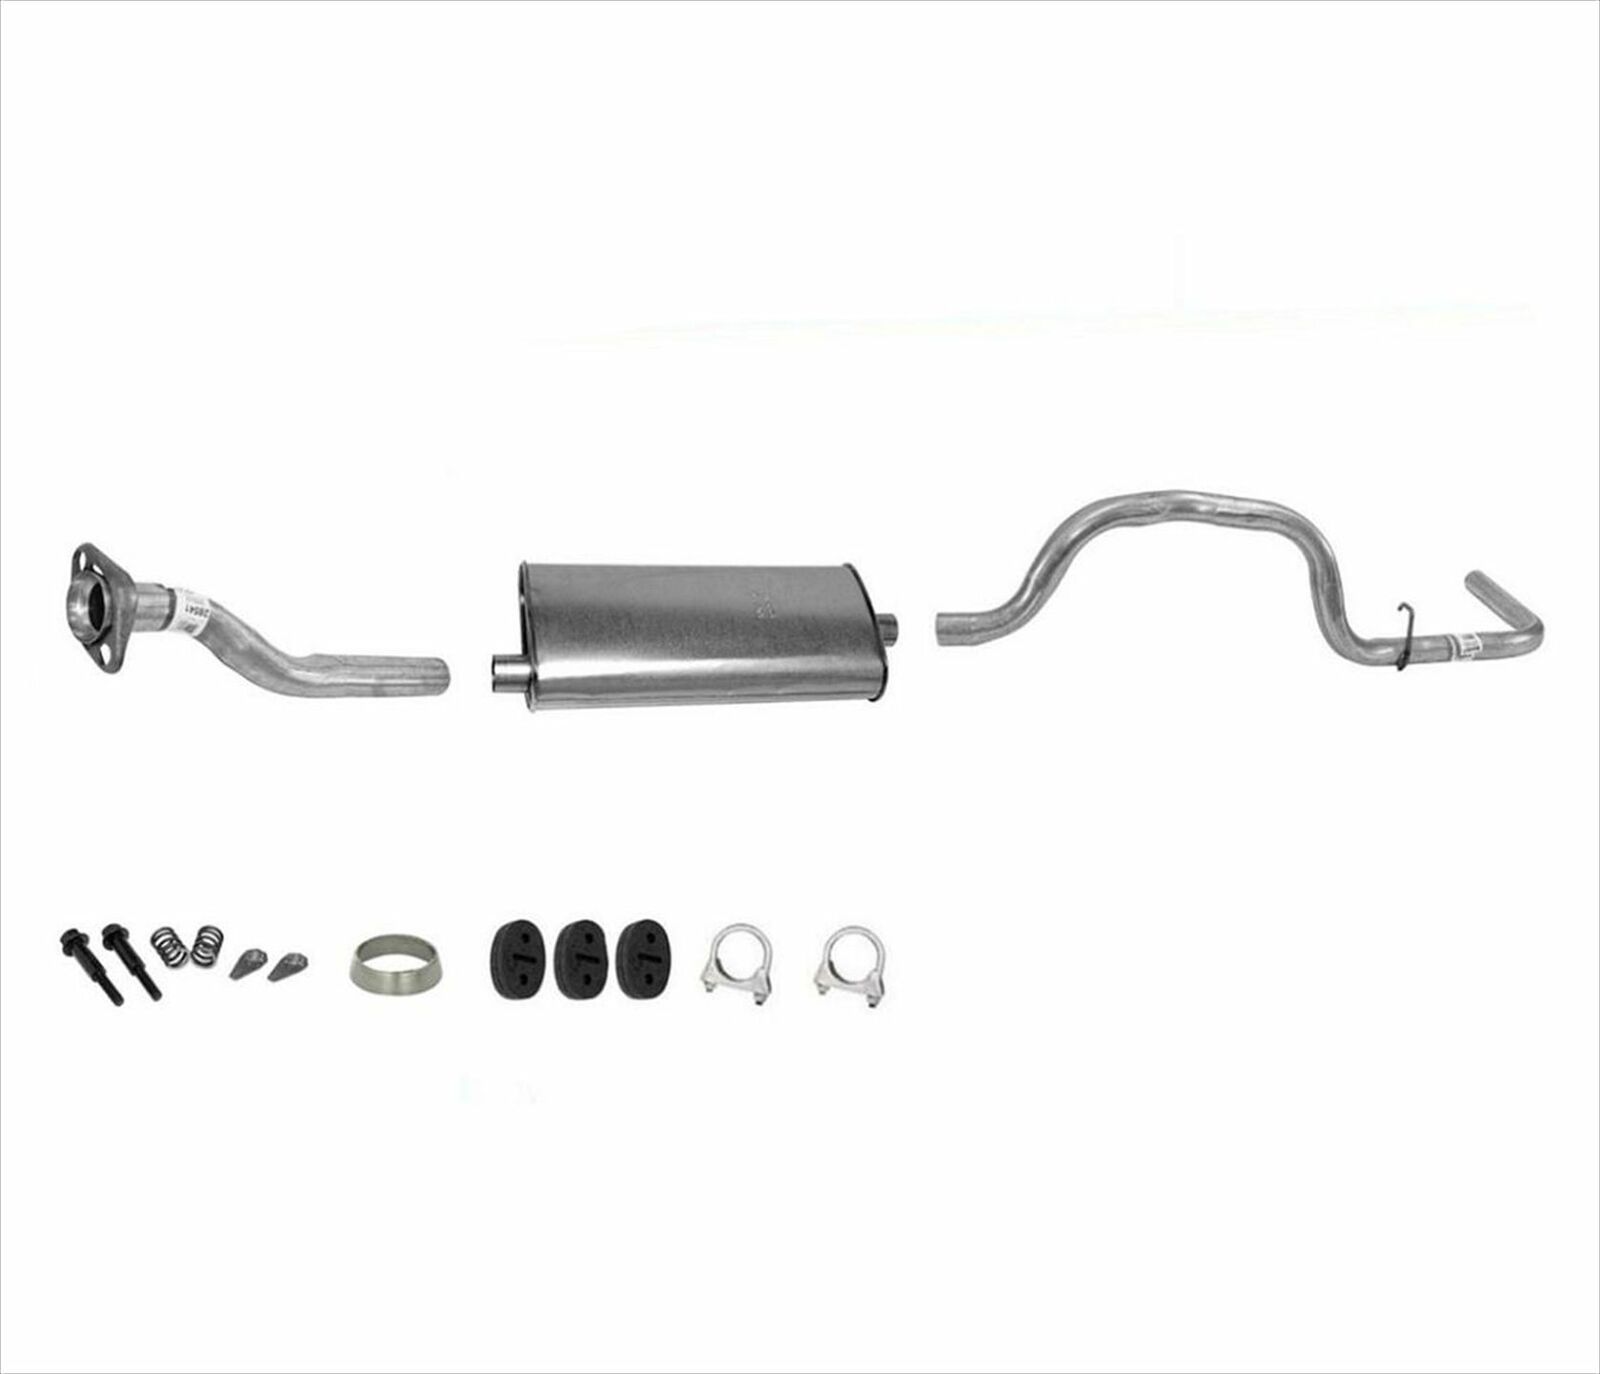 Exhaust System Muffler For 98-03 Ranger 3.0 4.0 Only With 112 Inch Wheel Base